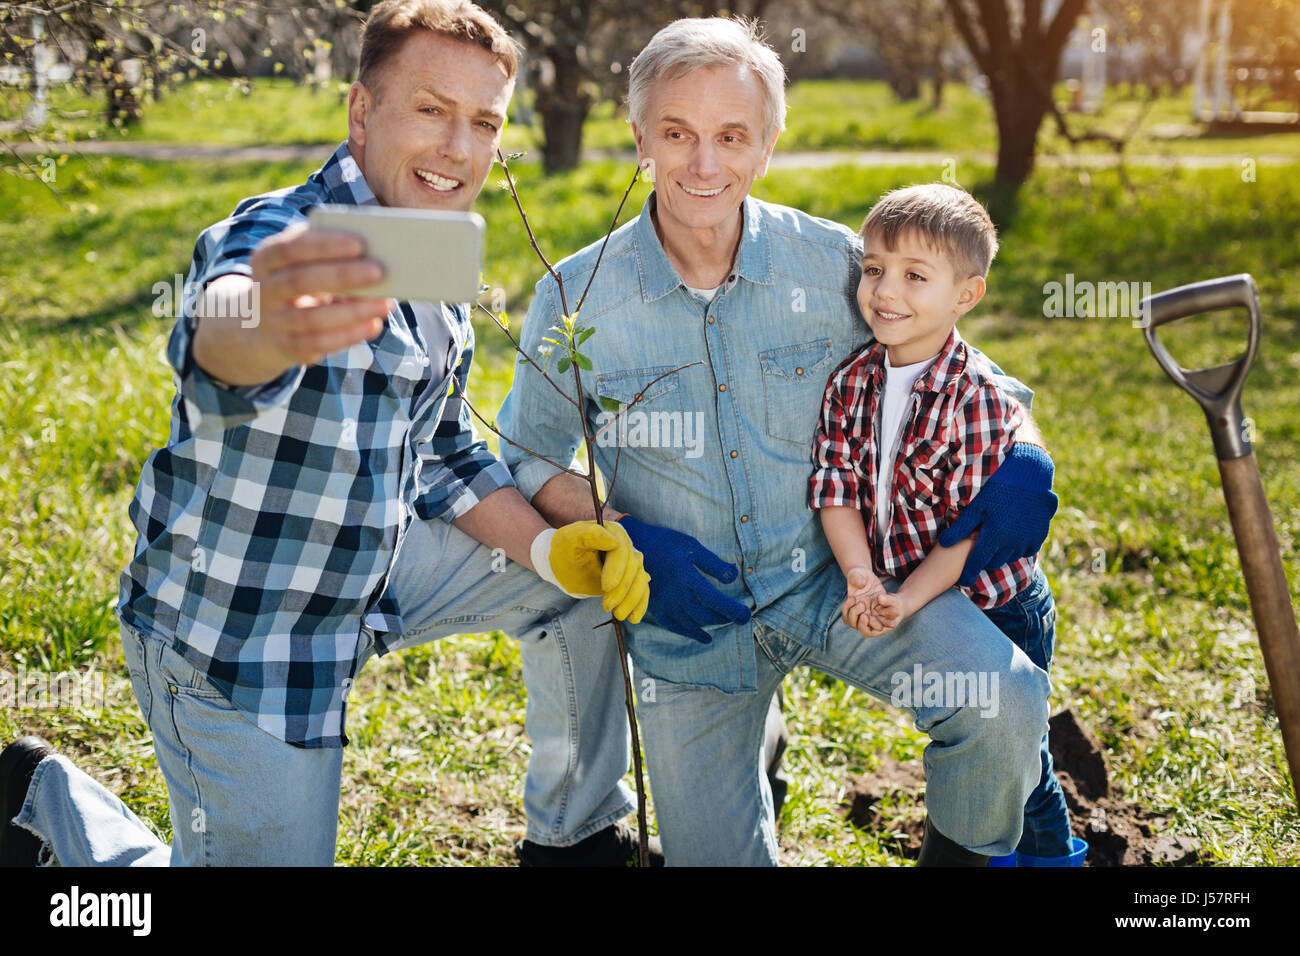 Father taking selfie with family members Stock Photo